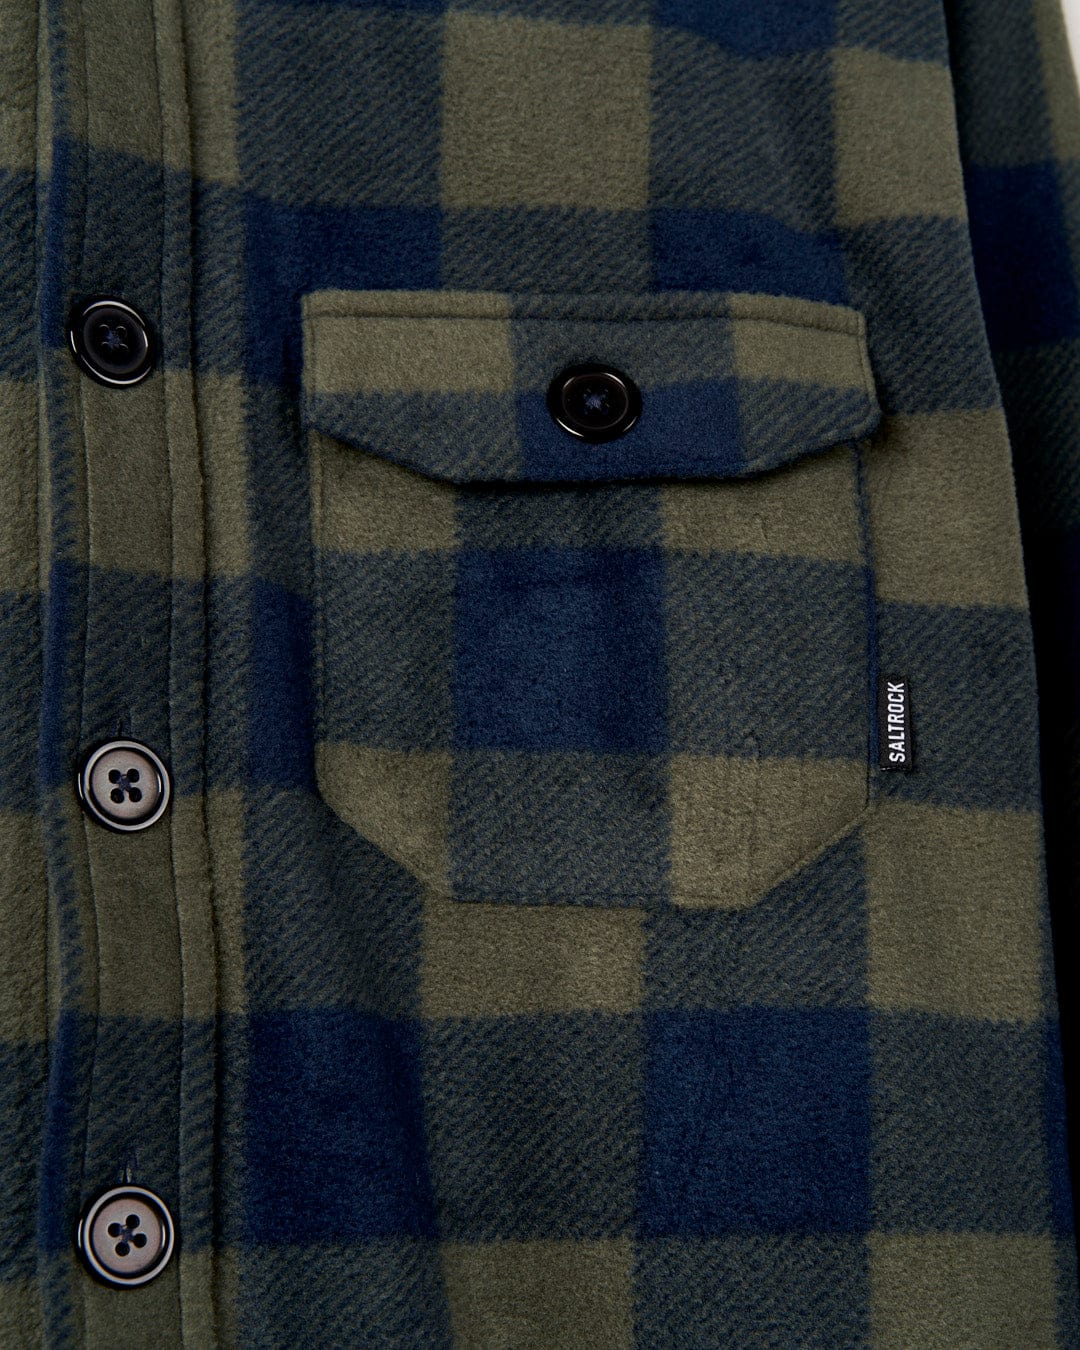 Close-up of a Waldron - Mens Fleece Shirt - Dark Green flannel shirt from Saltrock with a pocket and buttons, featuring a small logo tag on the pocket.